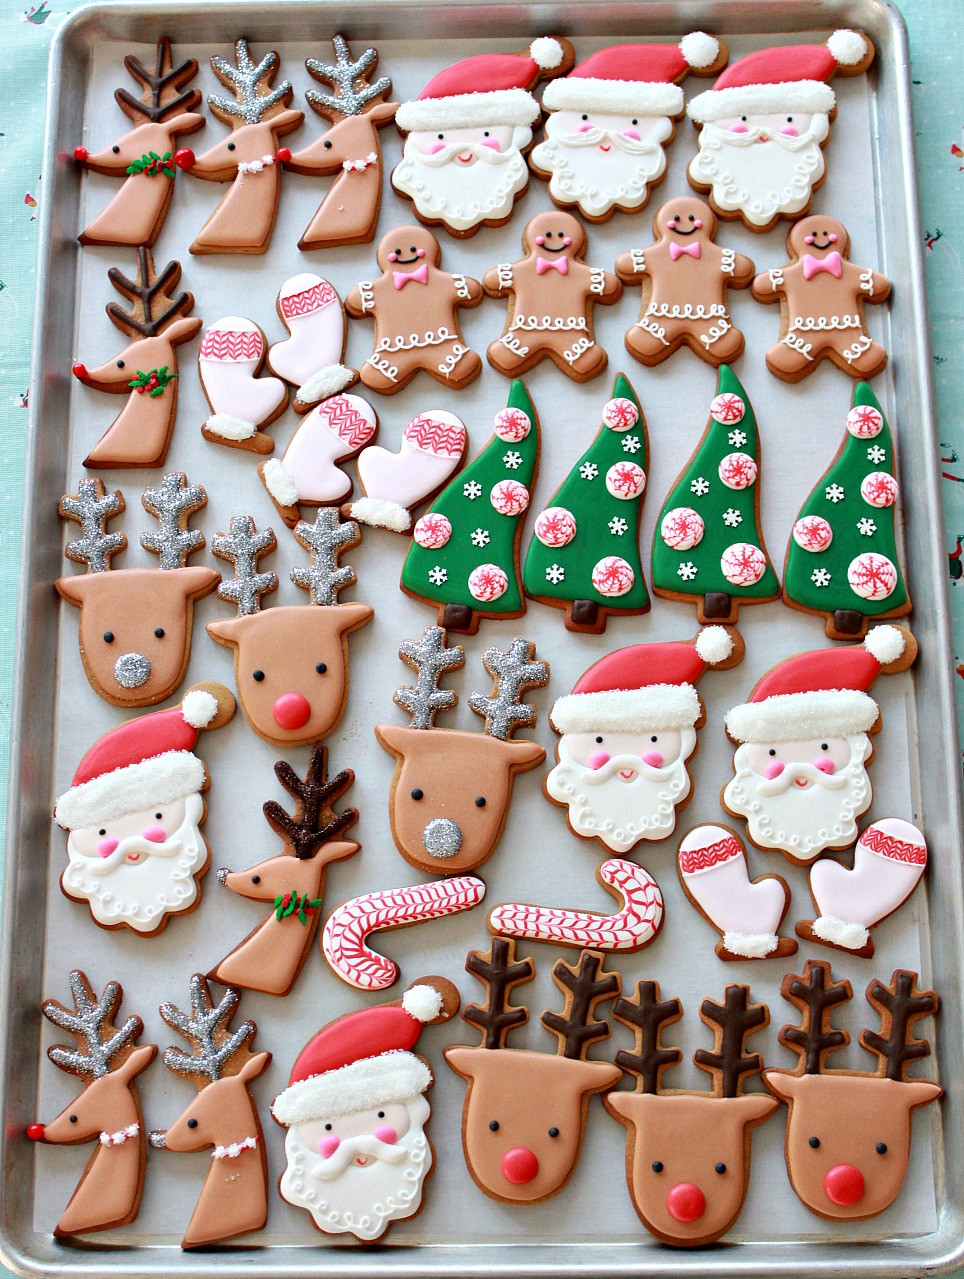 Christmas Cookies Decorating Ideas
 Video How to Decorate Christmas Cookies Simple Designs